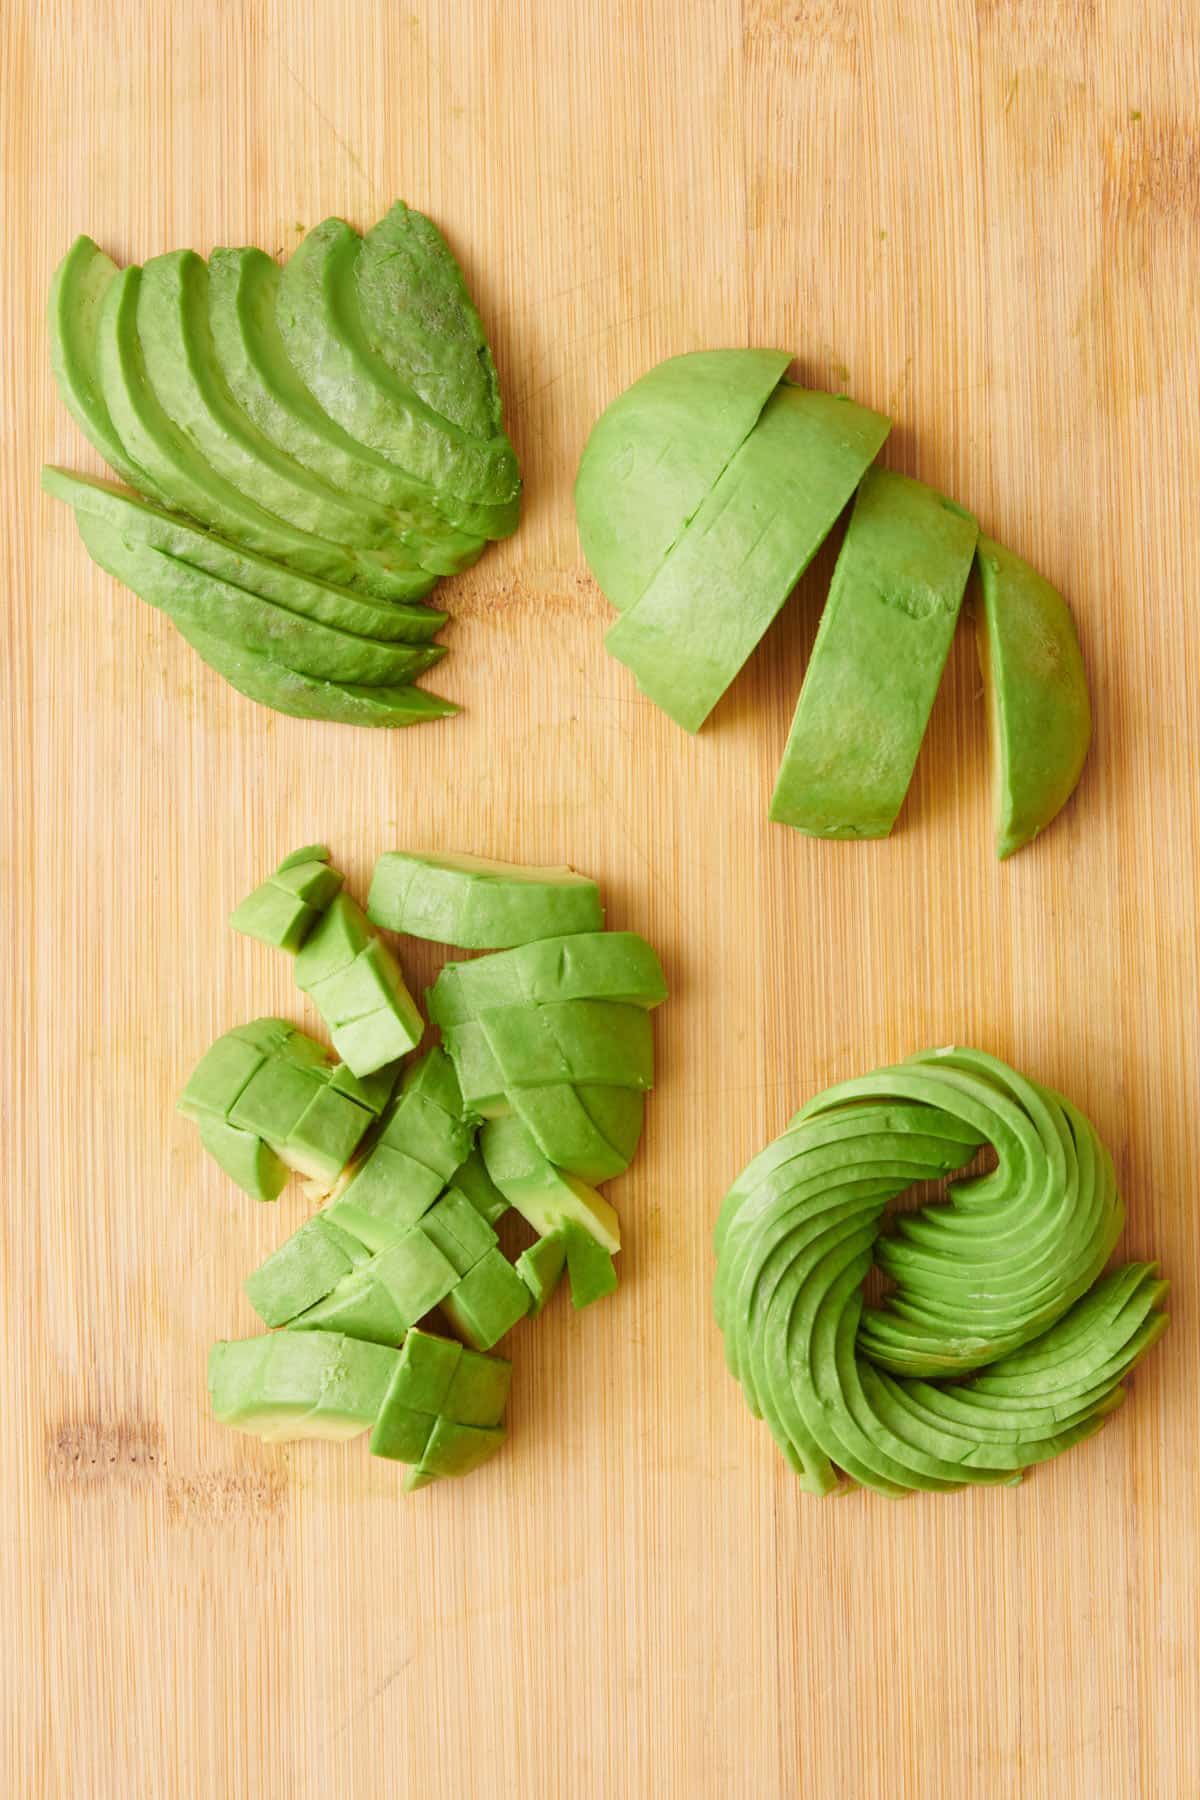 Avocado cuts 4 ways: slices, wedges, diced, and roses.